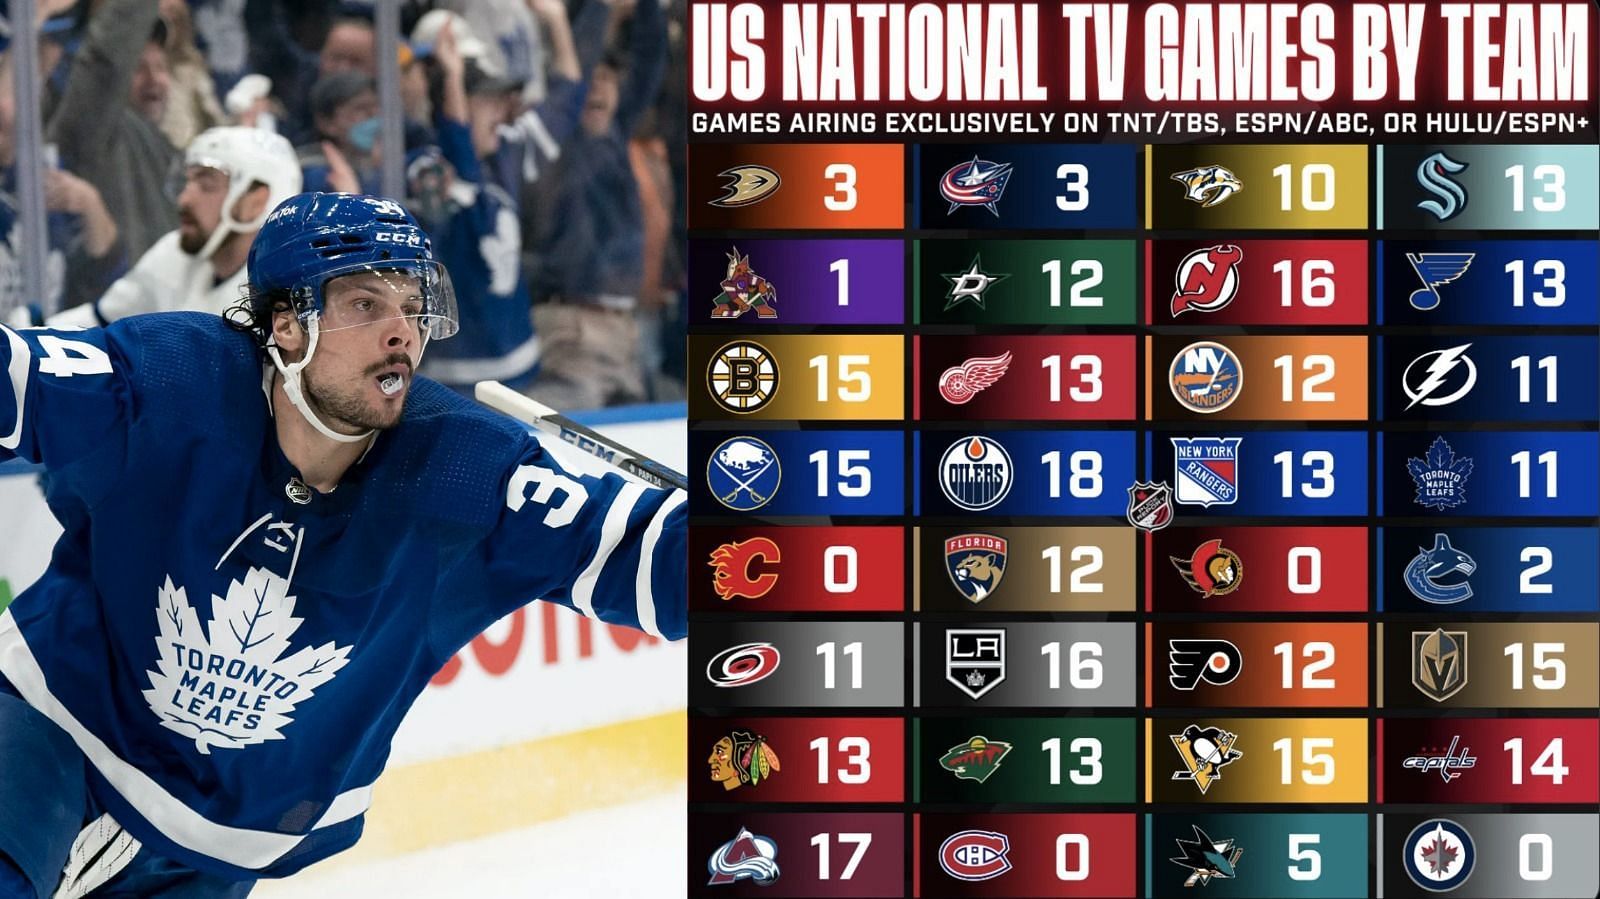 hockey games today on tv